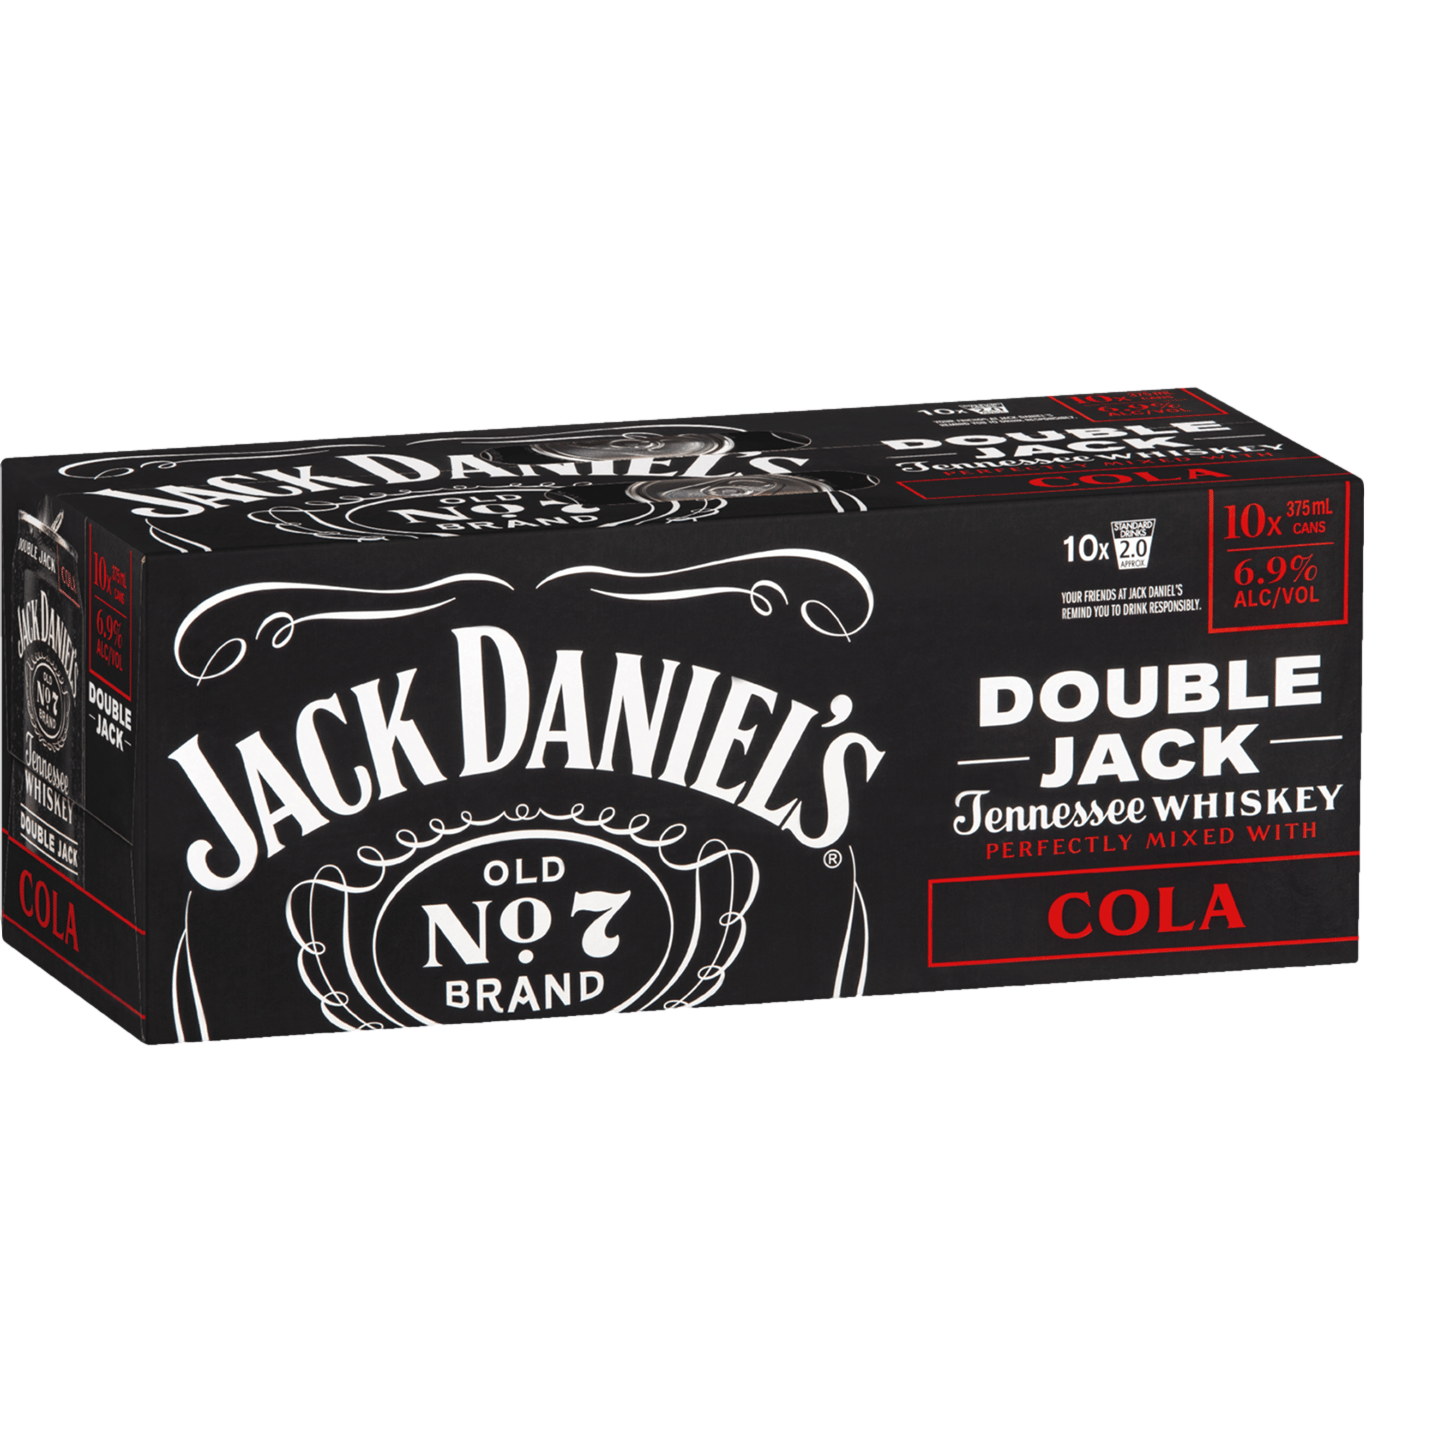 Jack Daniel's Double Jack & Cola 6.9% 375ml Can 10 Pack